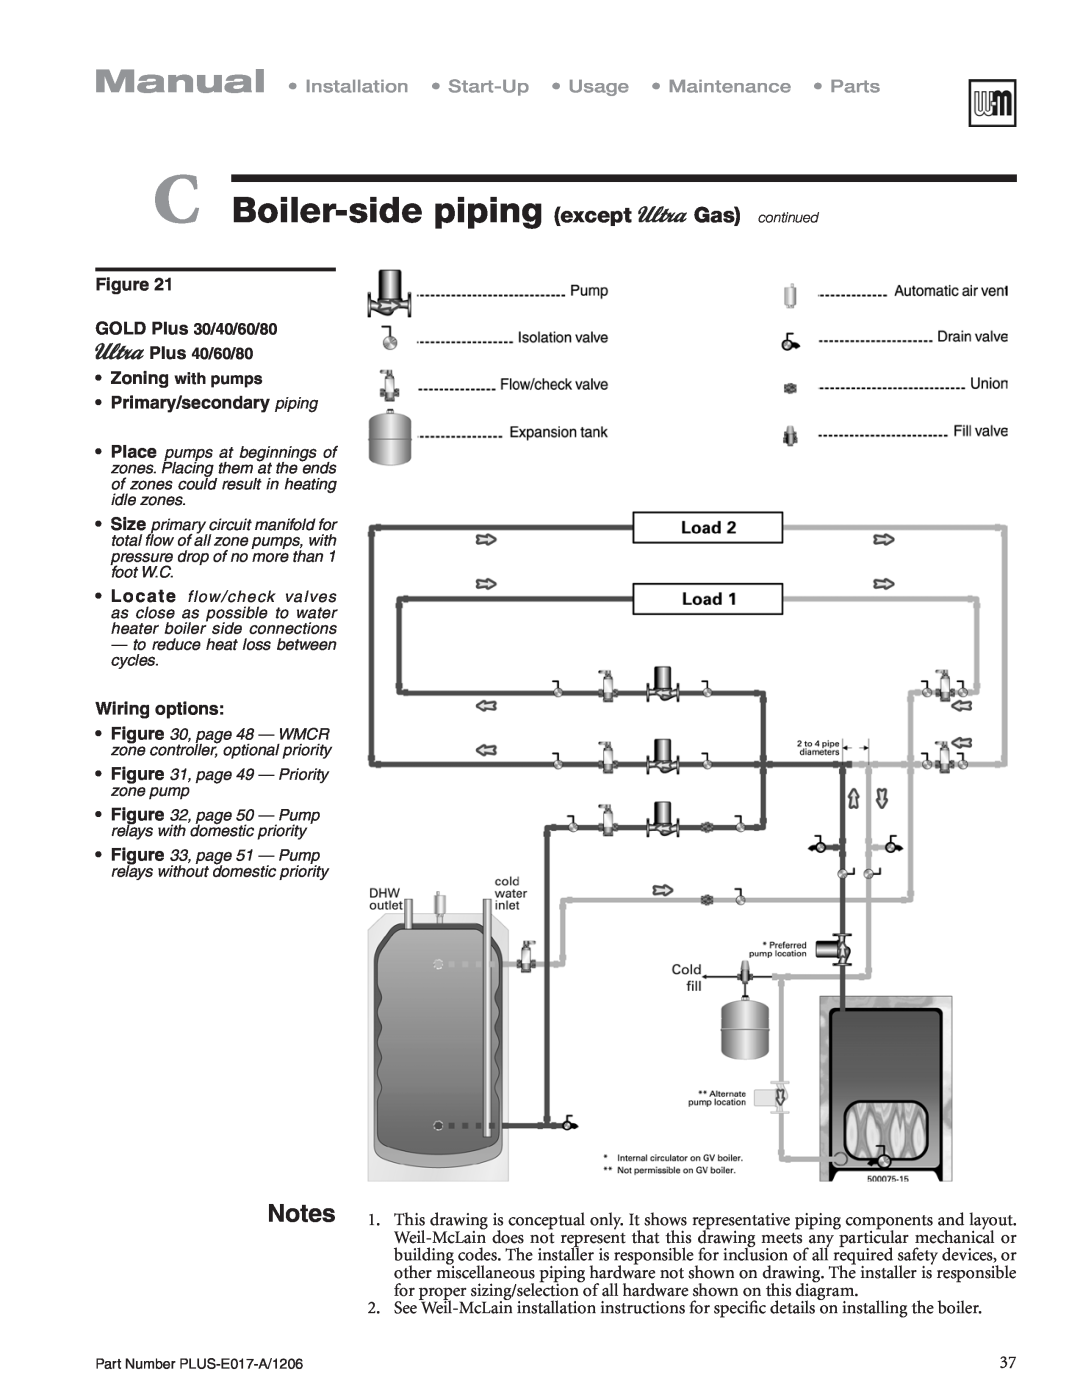 Weil-McLain PLUS-E017-A/1206 manual Primary/secondary piping, C Boiler-sidepiping except Gas continued, Wiring options 